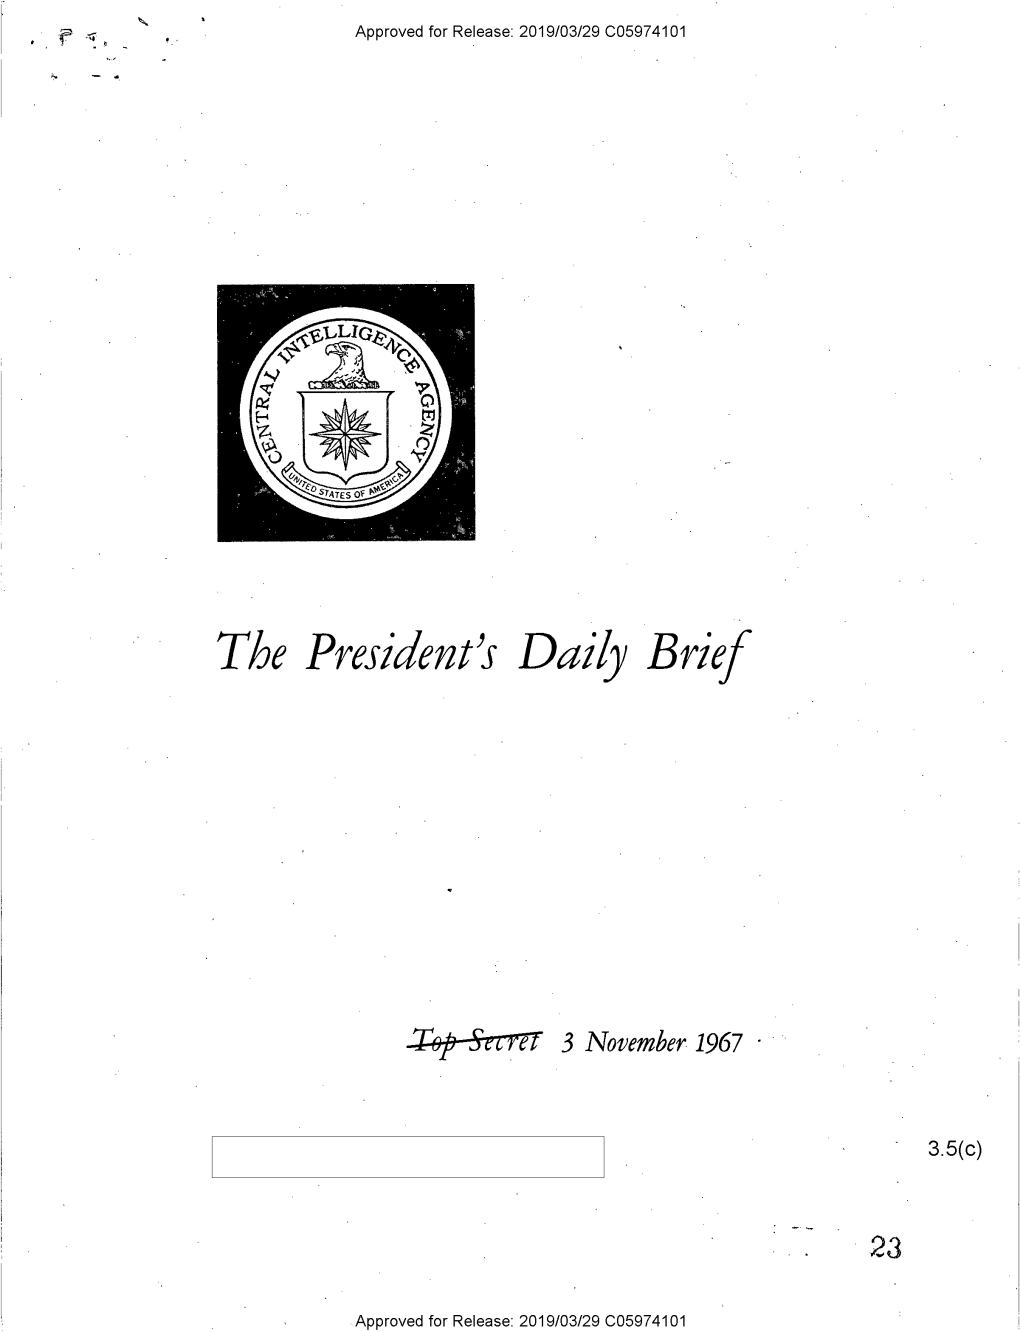 President's Daily Brief/ Special Daily Report, 3 November 1967